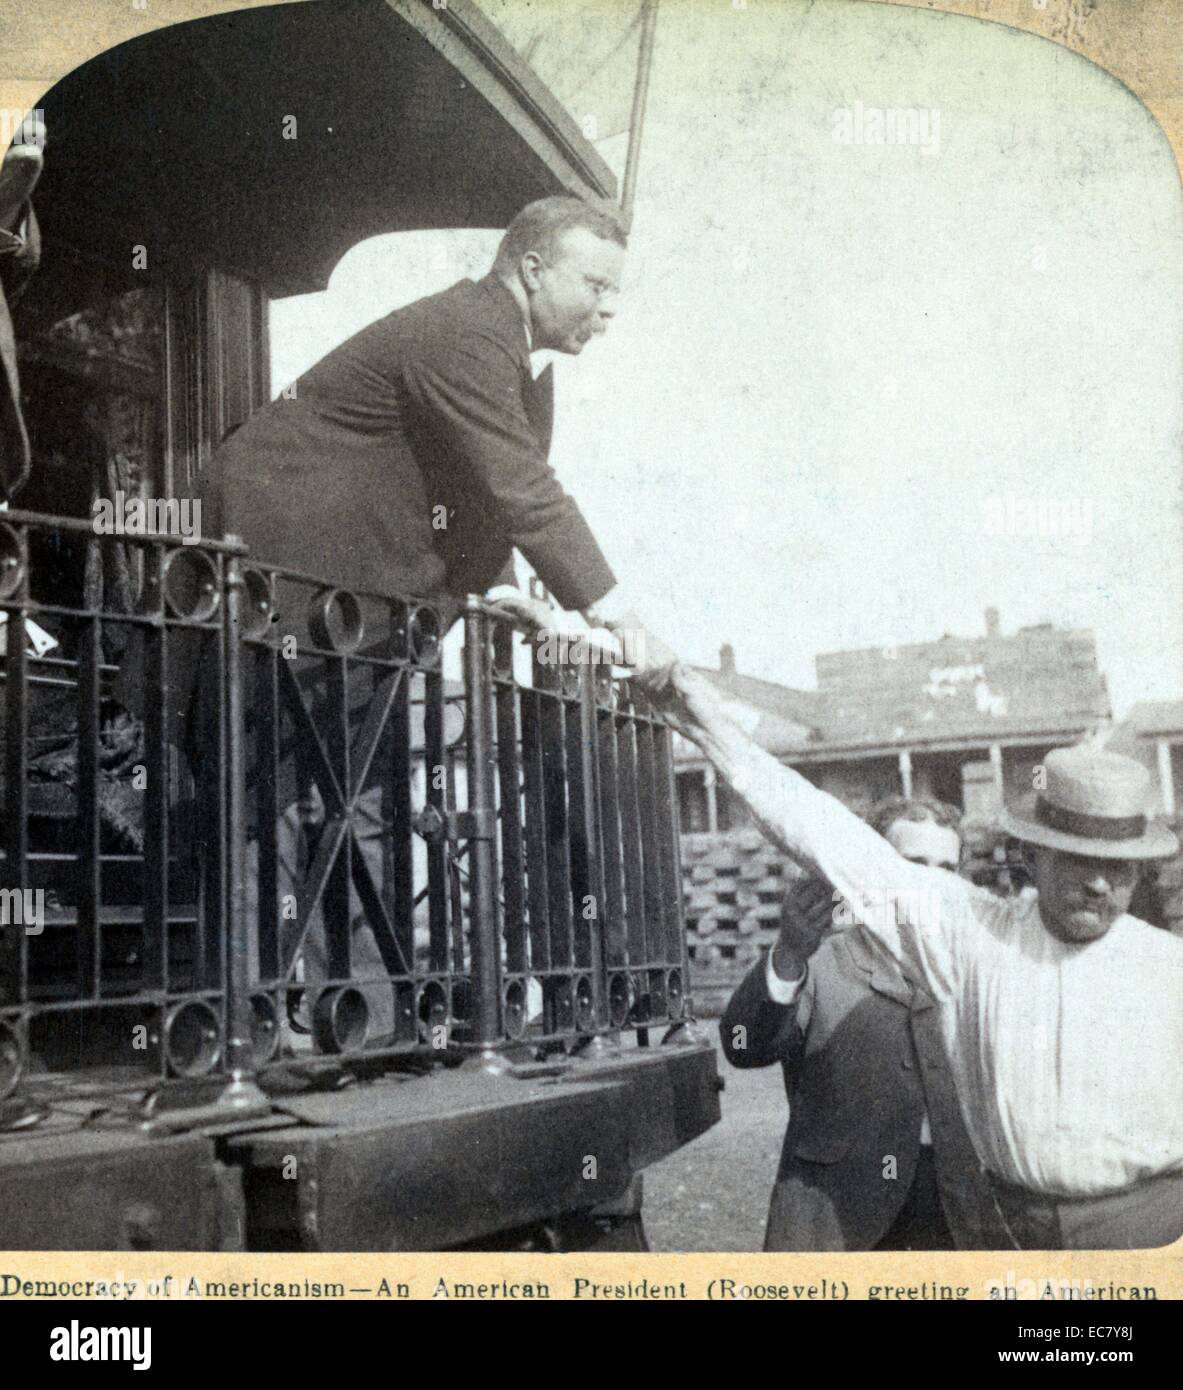 Stereograph showing Roosevelt shaking a man's hand from a train.' Democracy of Americanism - an American President (Roosevelt) greeting an American workingman in Tennessee. Theodore Roosevelt (1858 – 1919) was an American politician, author, naturalist, explorer, and historian who served as the 26th President of the United States. Stock Photo